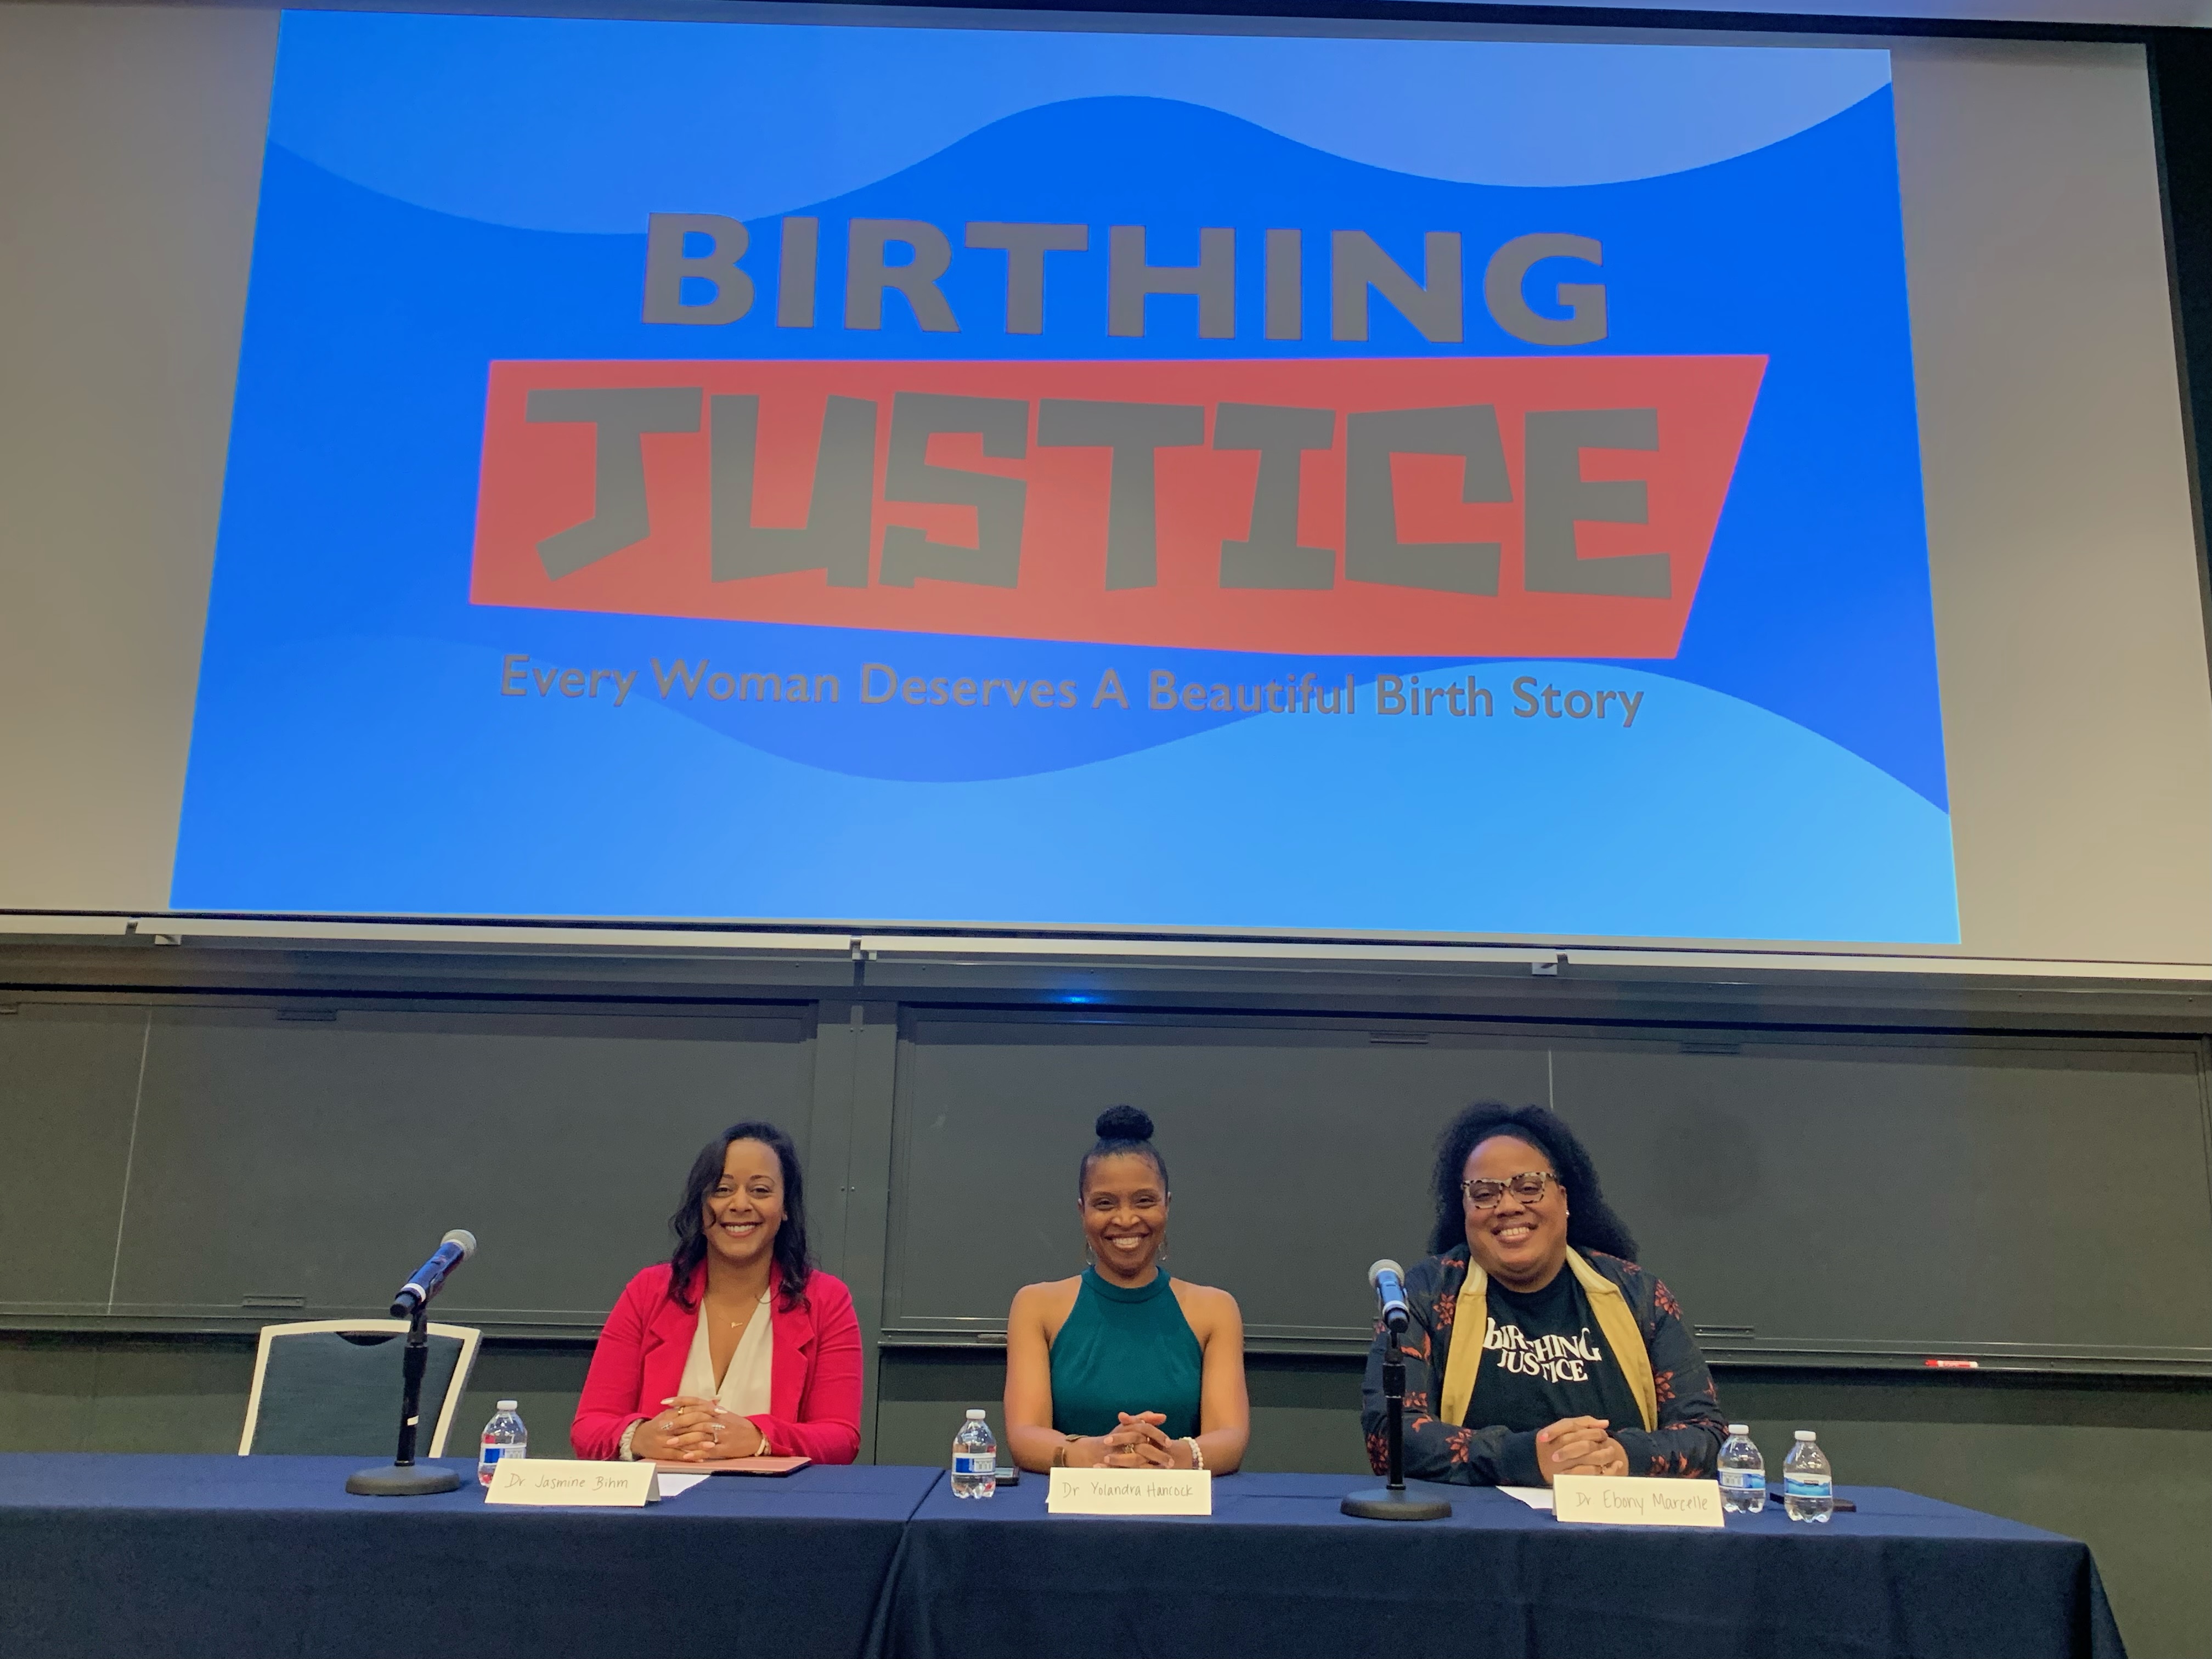 Panelists at the Birthing Justice Event